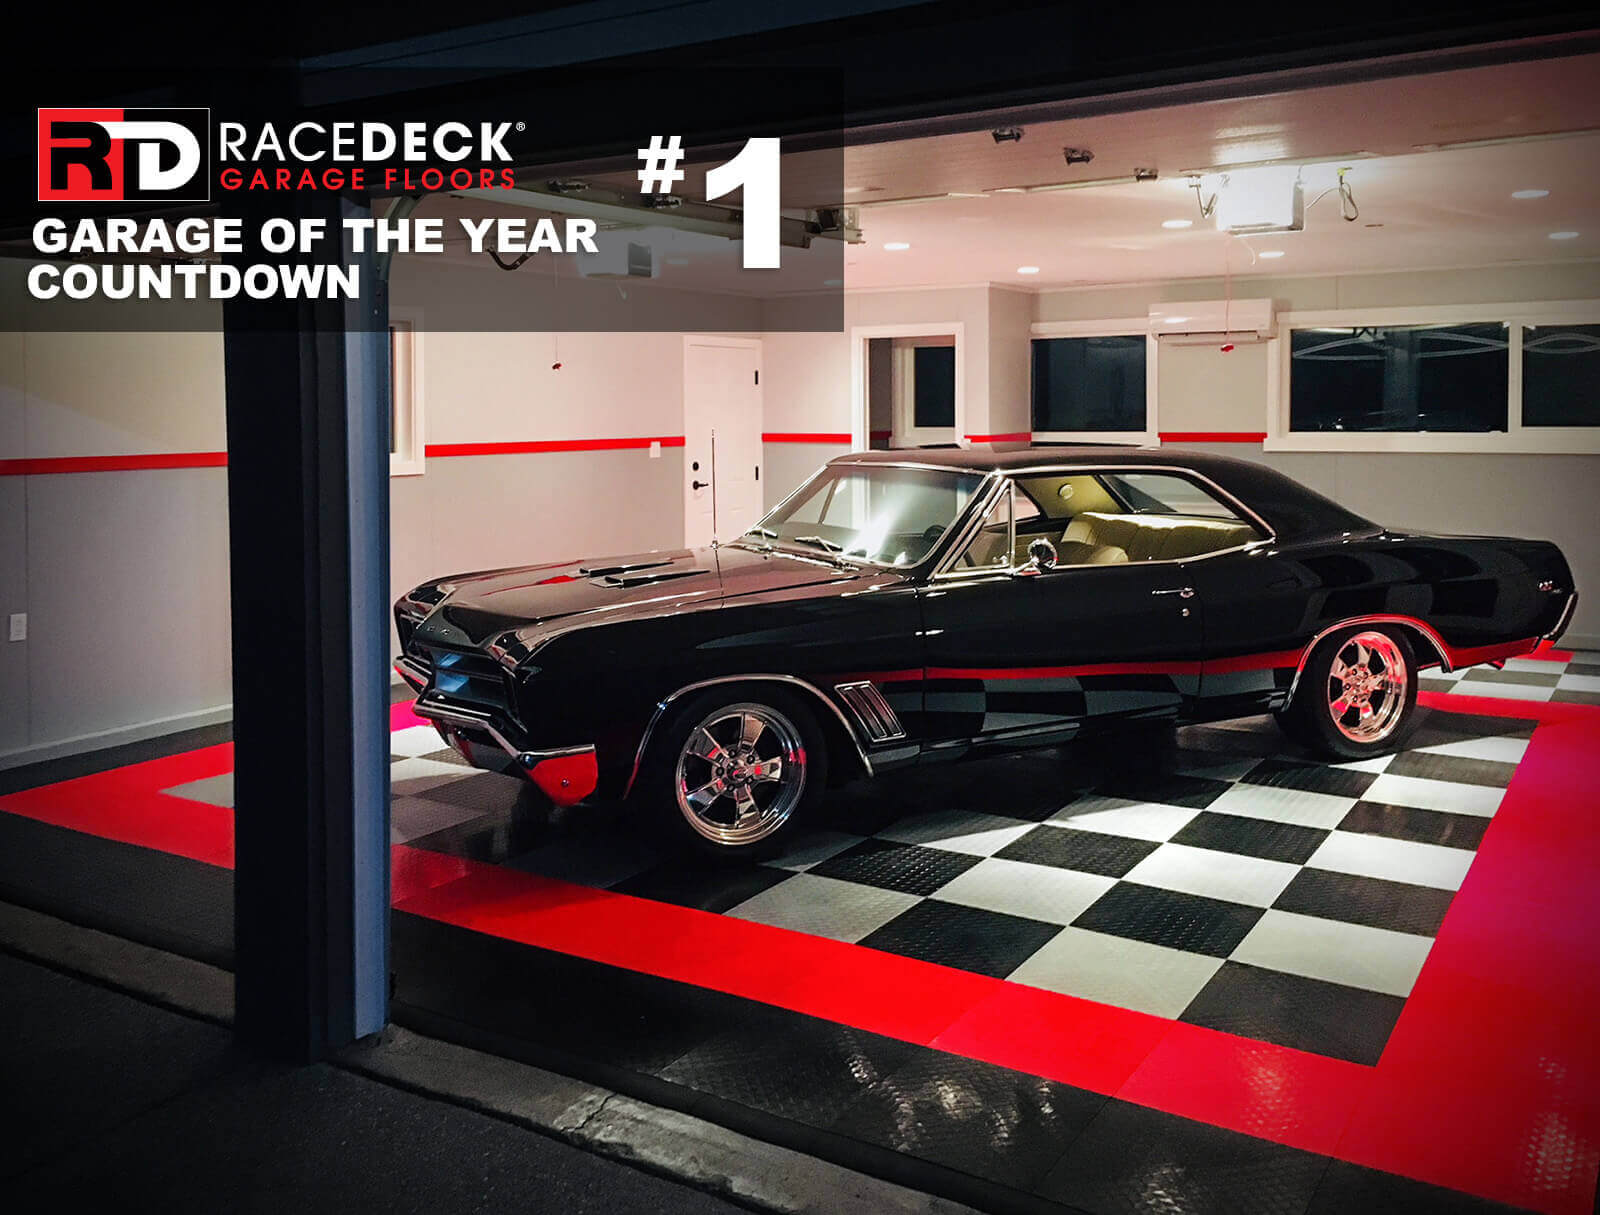 The grand prize winning entry featuring RaceDeck Diamond with Tuffshield<sup>®</sup> flooring, not to mention the sweet Buick GS that calls this garage home.